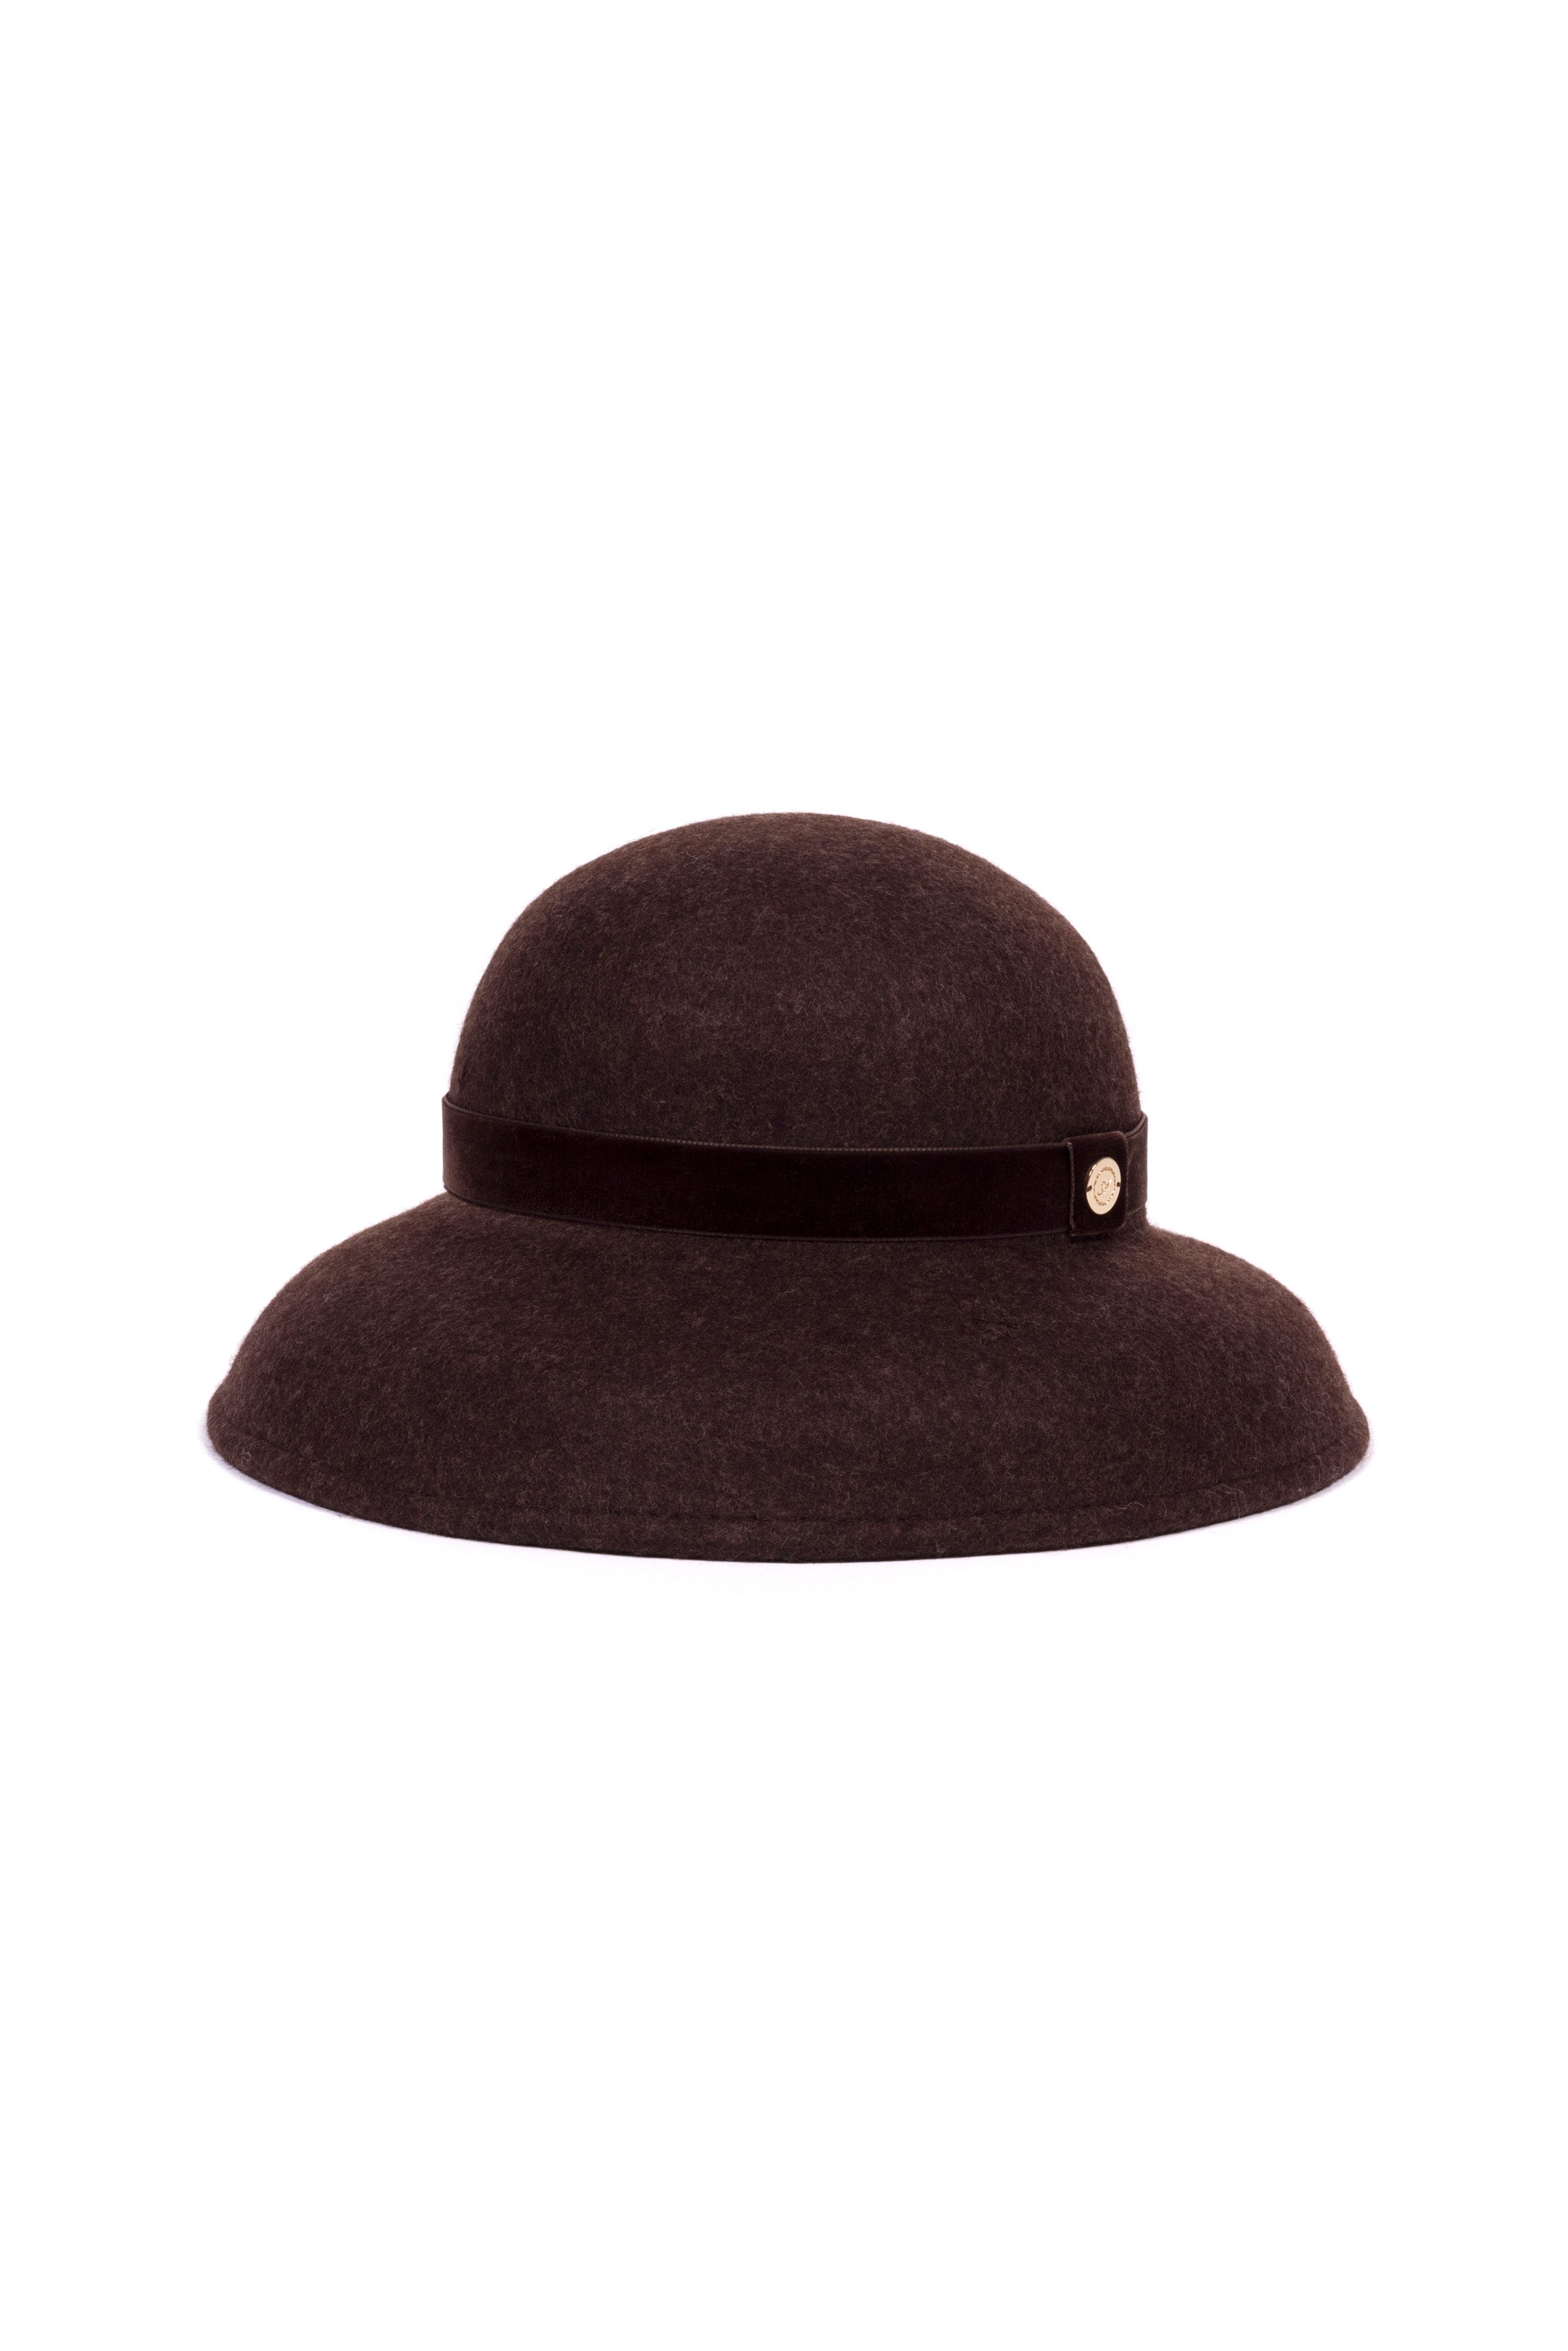 Pure Wool Audrey Hat (Chocolate)